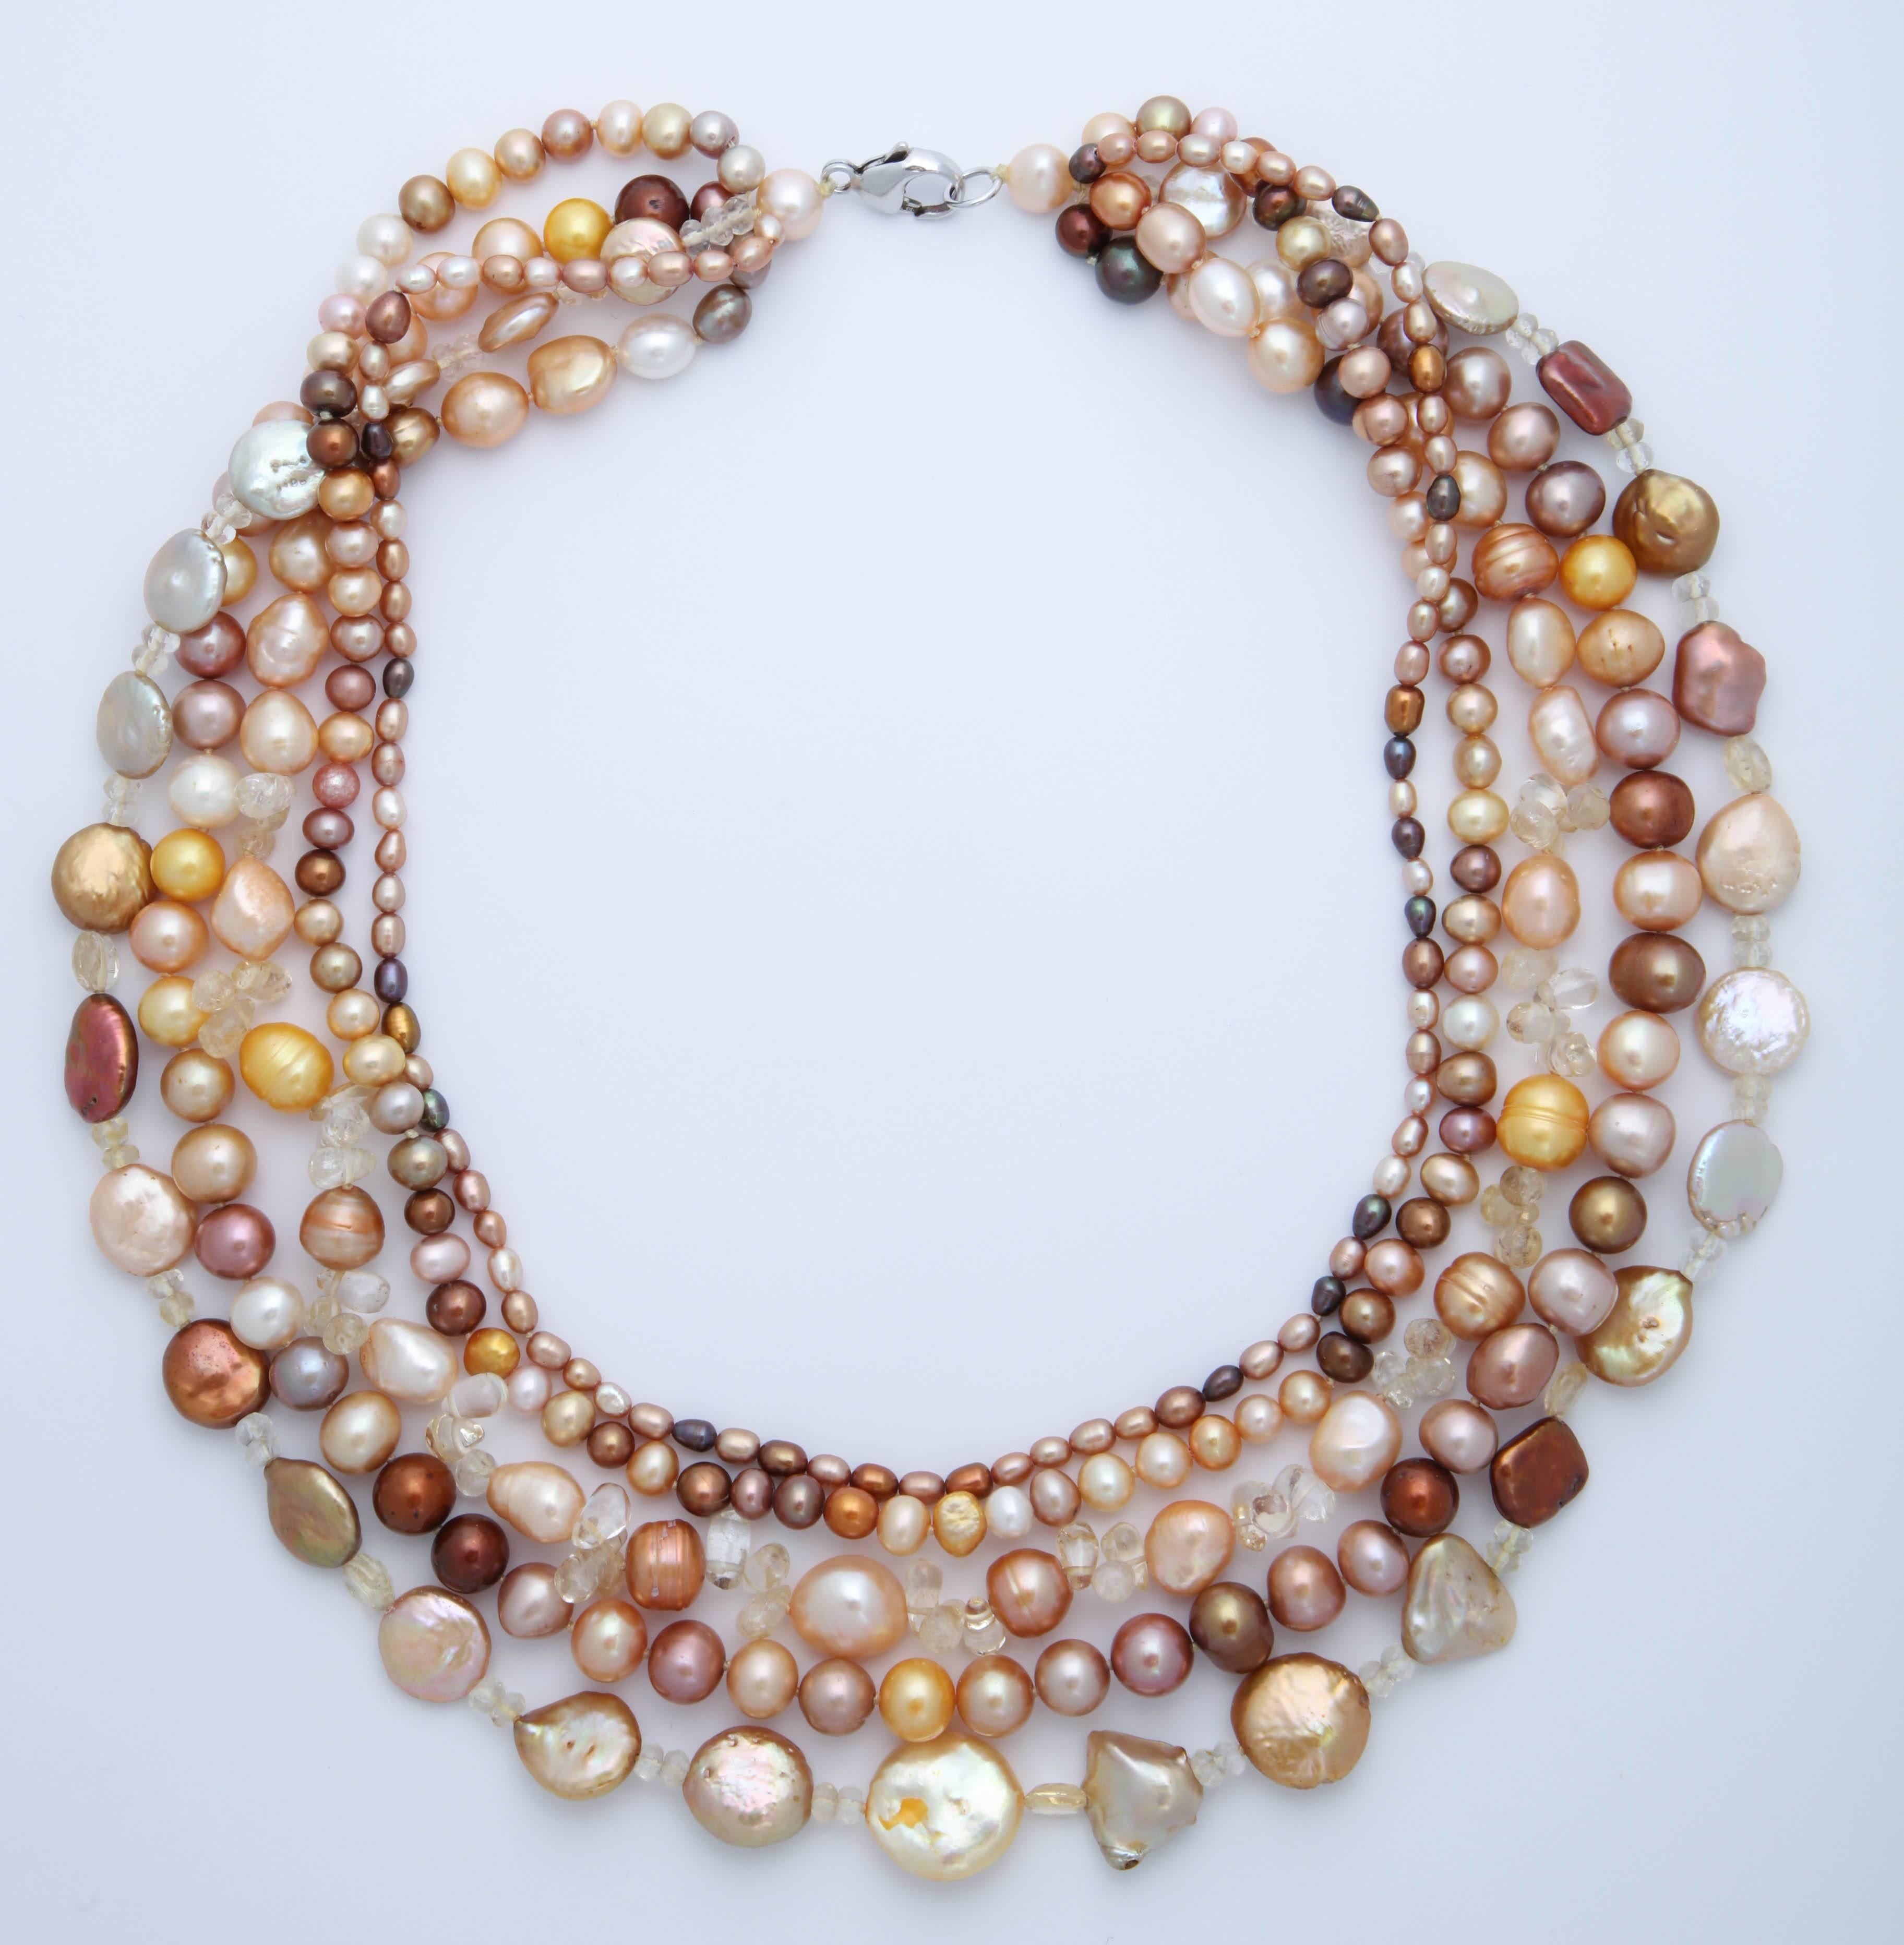 5 Strands of multi color, variations of orange, beige and brown,  and multi shapes and sizes  fresh water pearl necklace. Great colors for any season. Necklace can  be worn flat or twisted. The shortest strand is 18 in. and the longest strand is 21